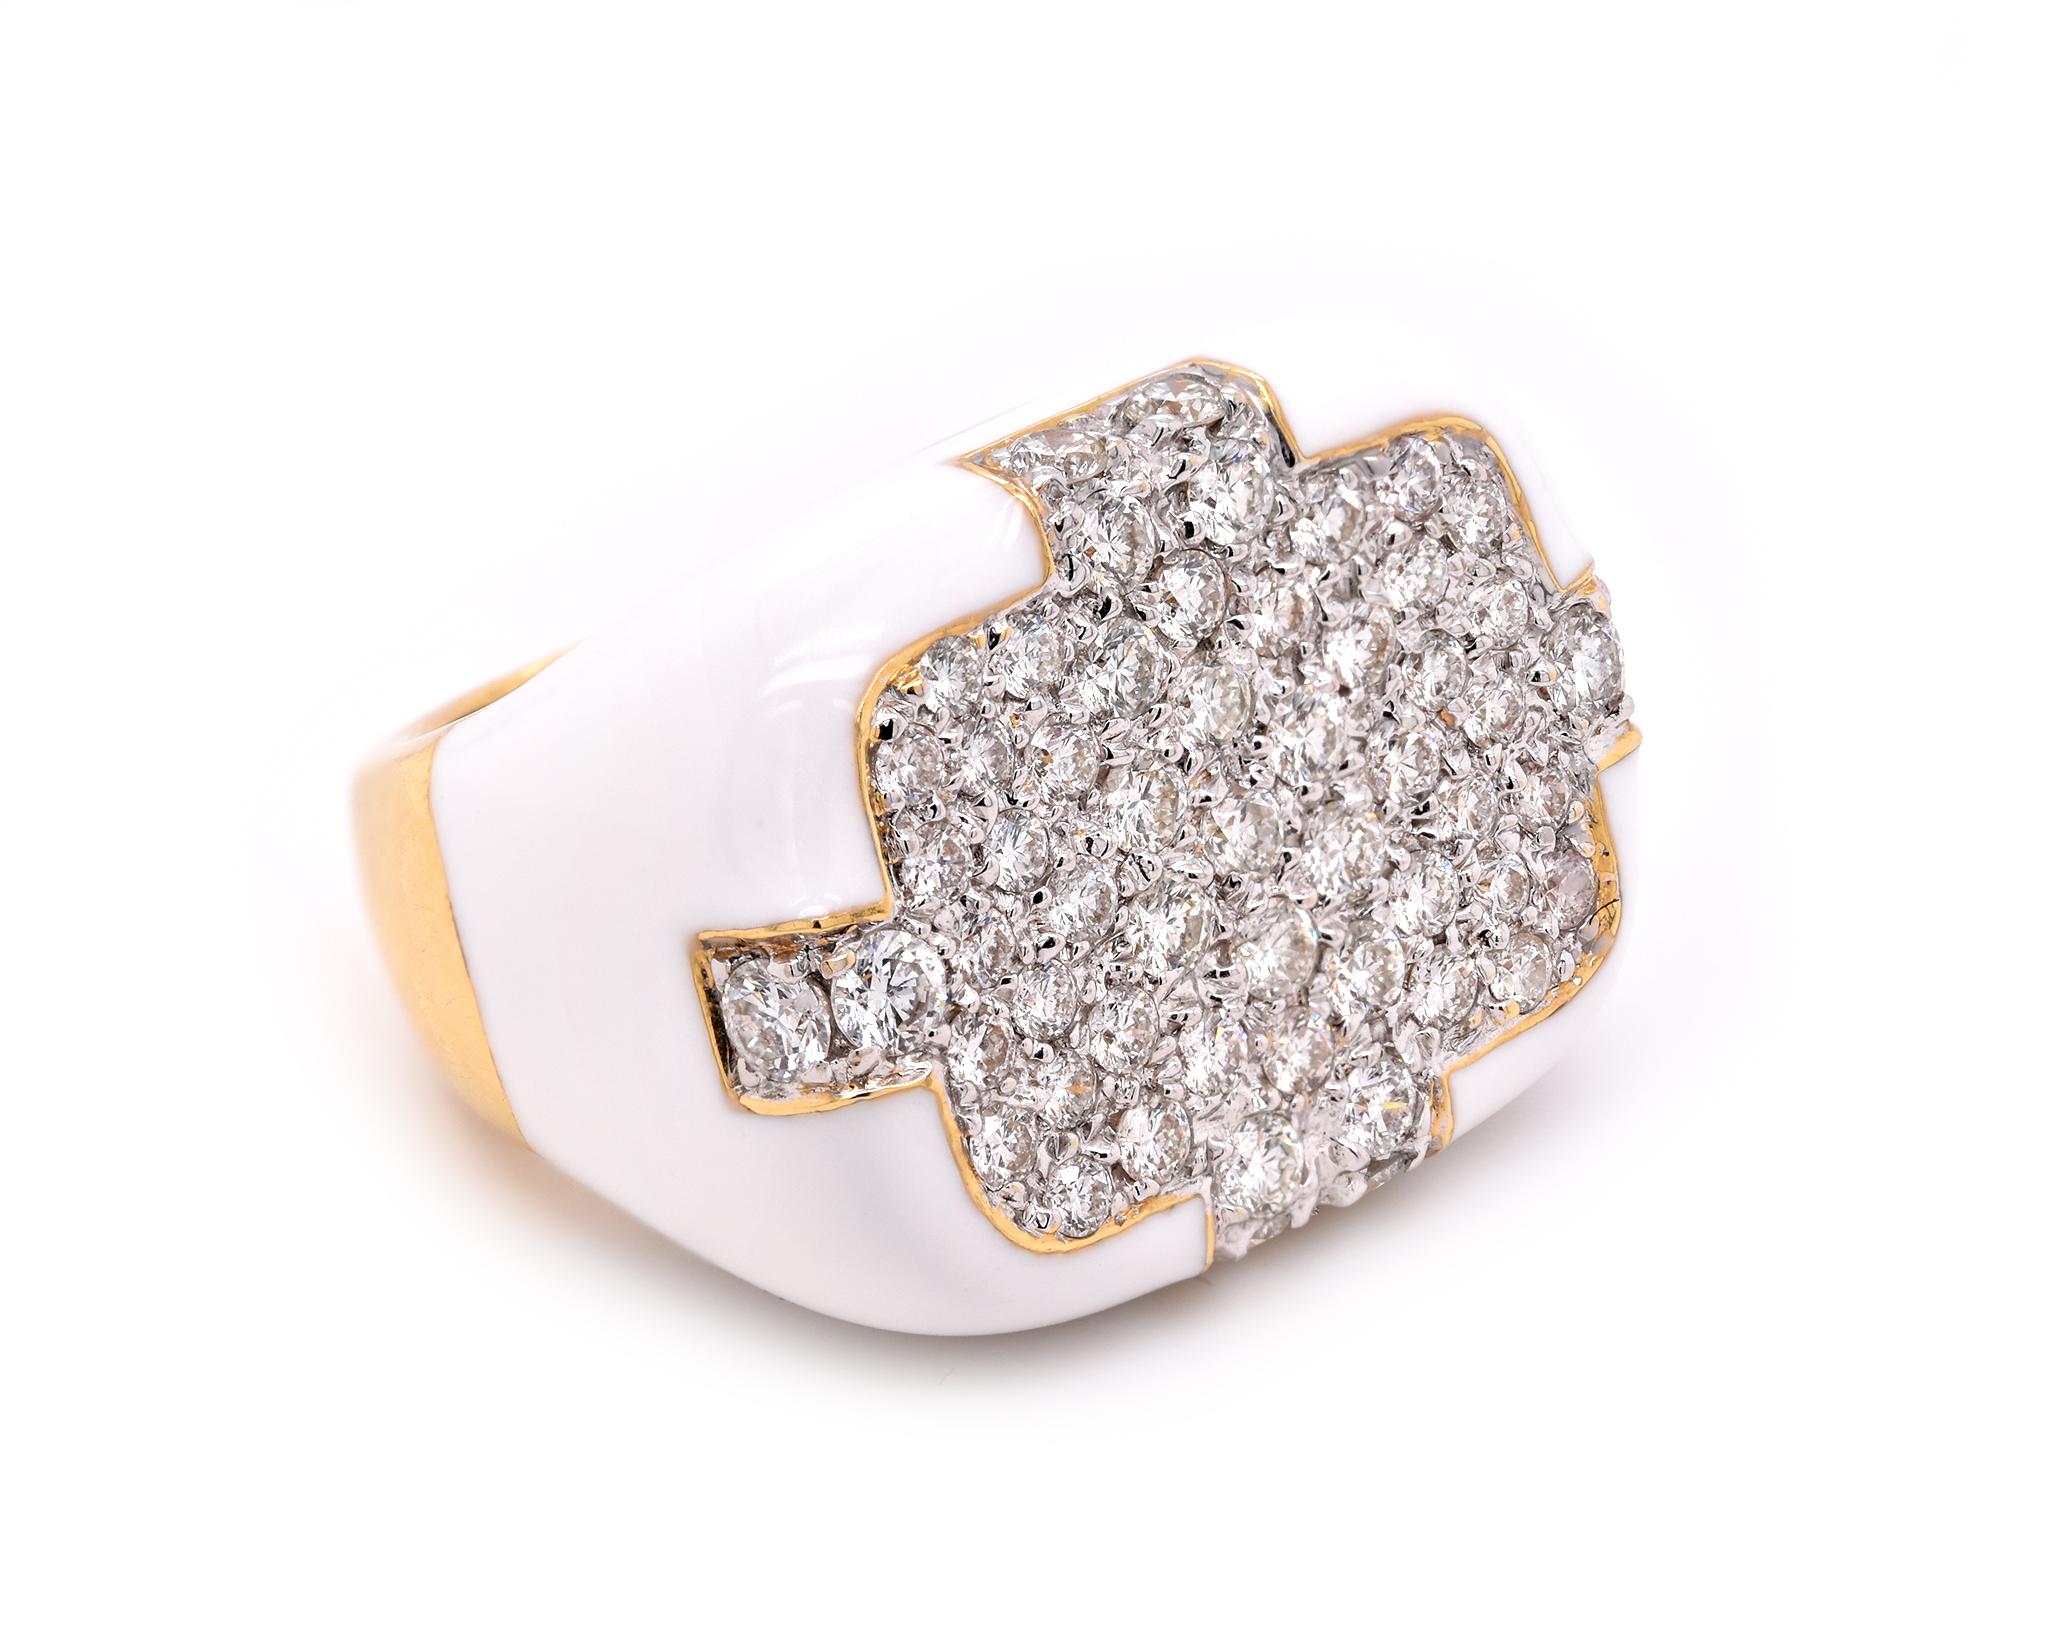 Designer: David Webb
Material: 18k yellow gold and white enamel
Diamonds: 60 round brilliant cuts = 1.75cttw
Color: G
Clarity: VS
Dimensions: ring top measures 19.10mm x 25.10mm
Weight: 16.9 grams
195-523